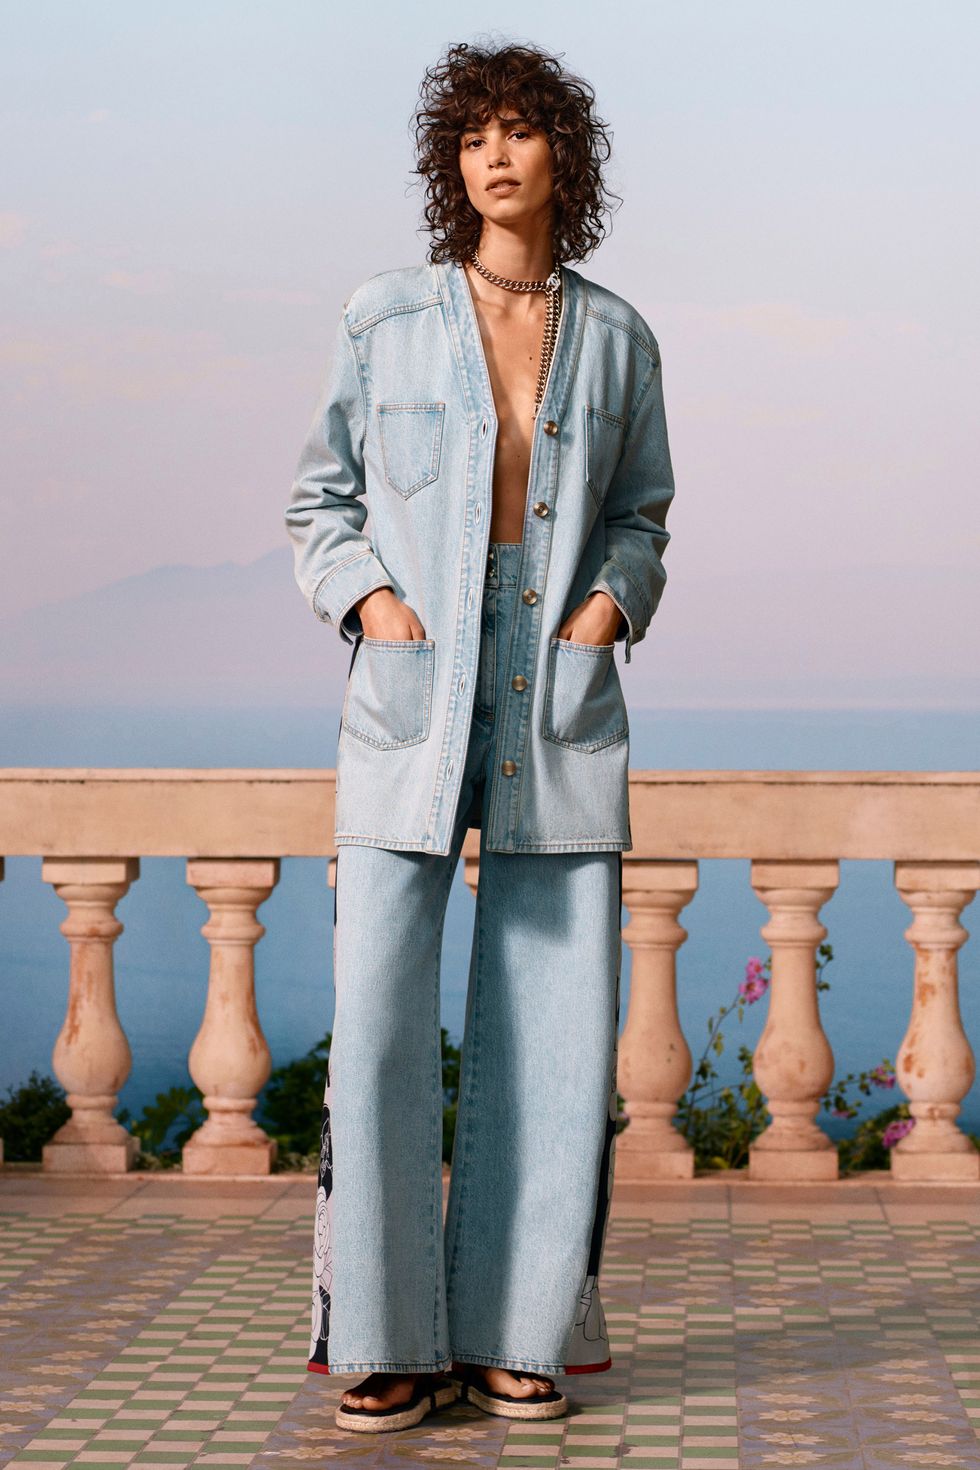 Chanel Announces its Cruise 2021 Show Will Take Place in Capri,Italy -  FASHION Magazine